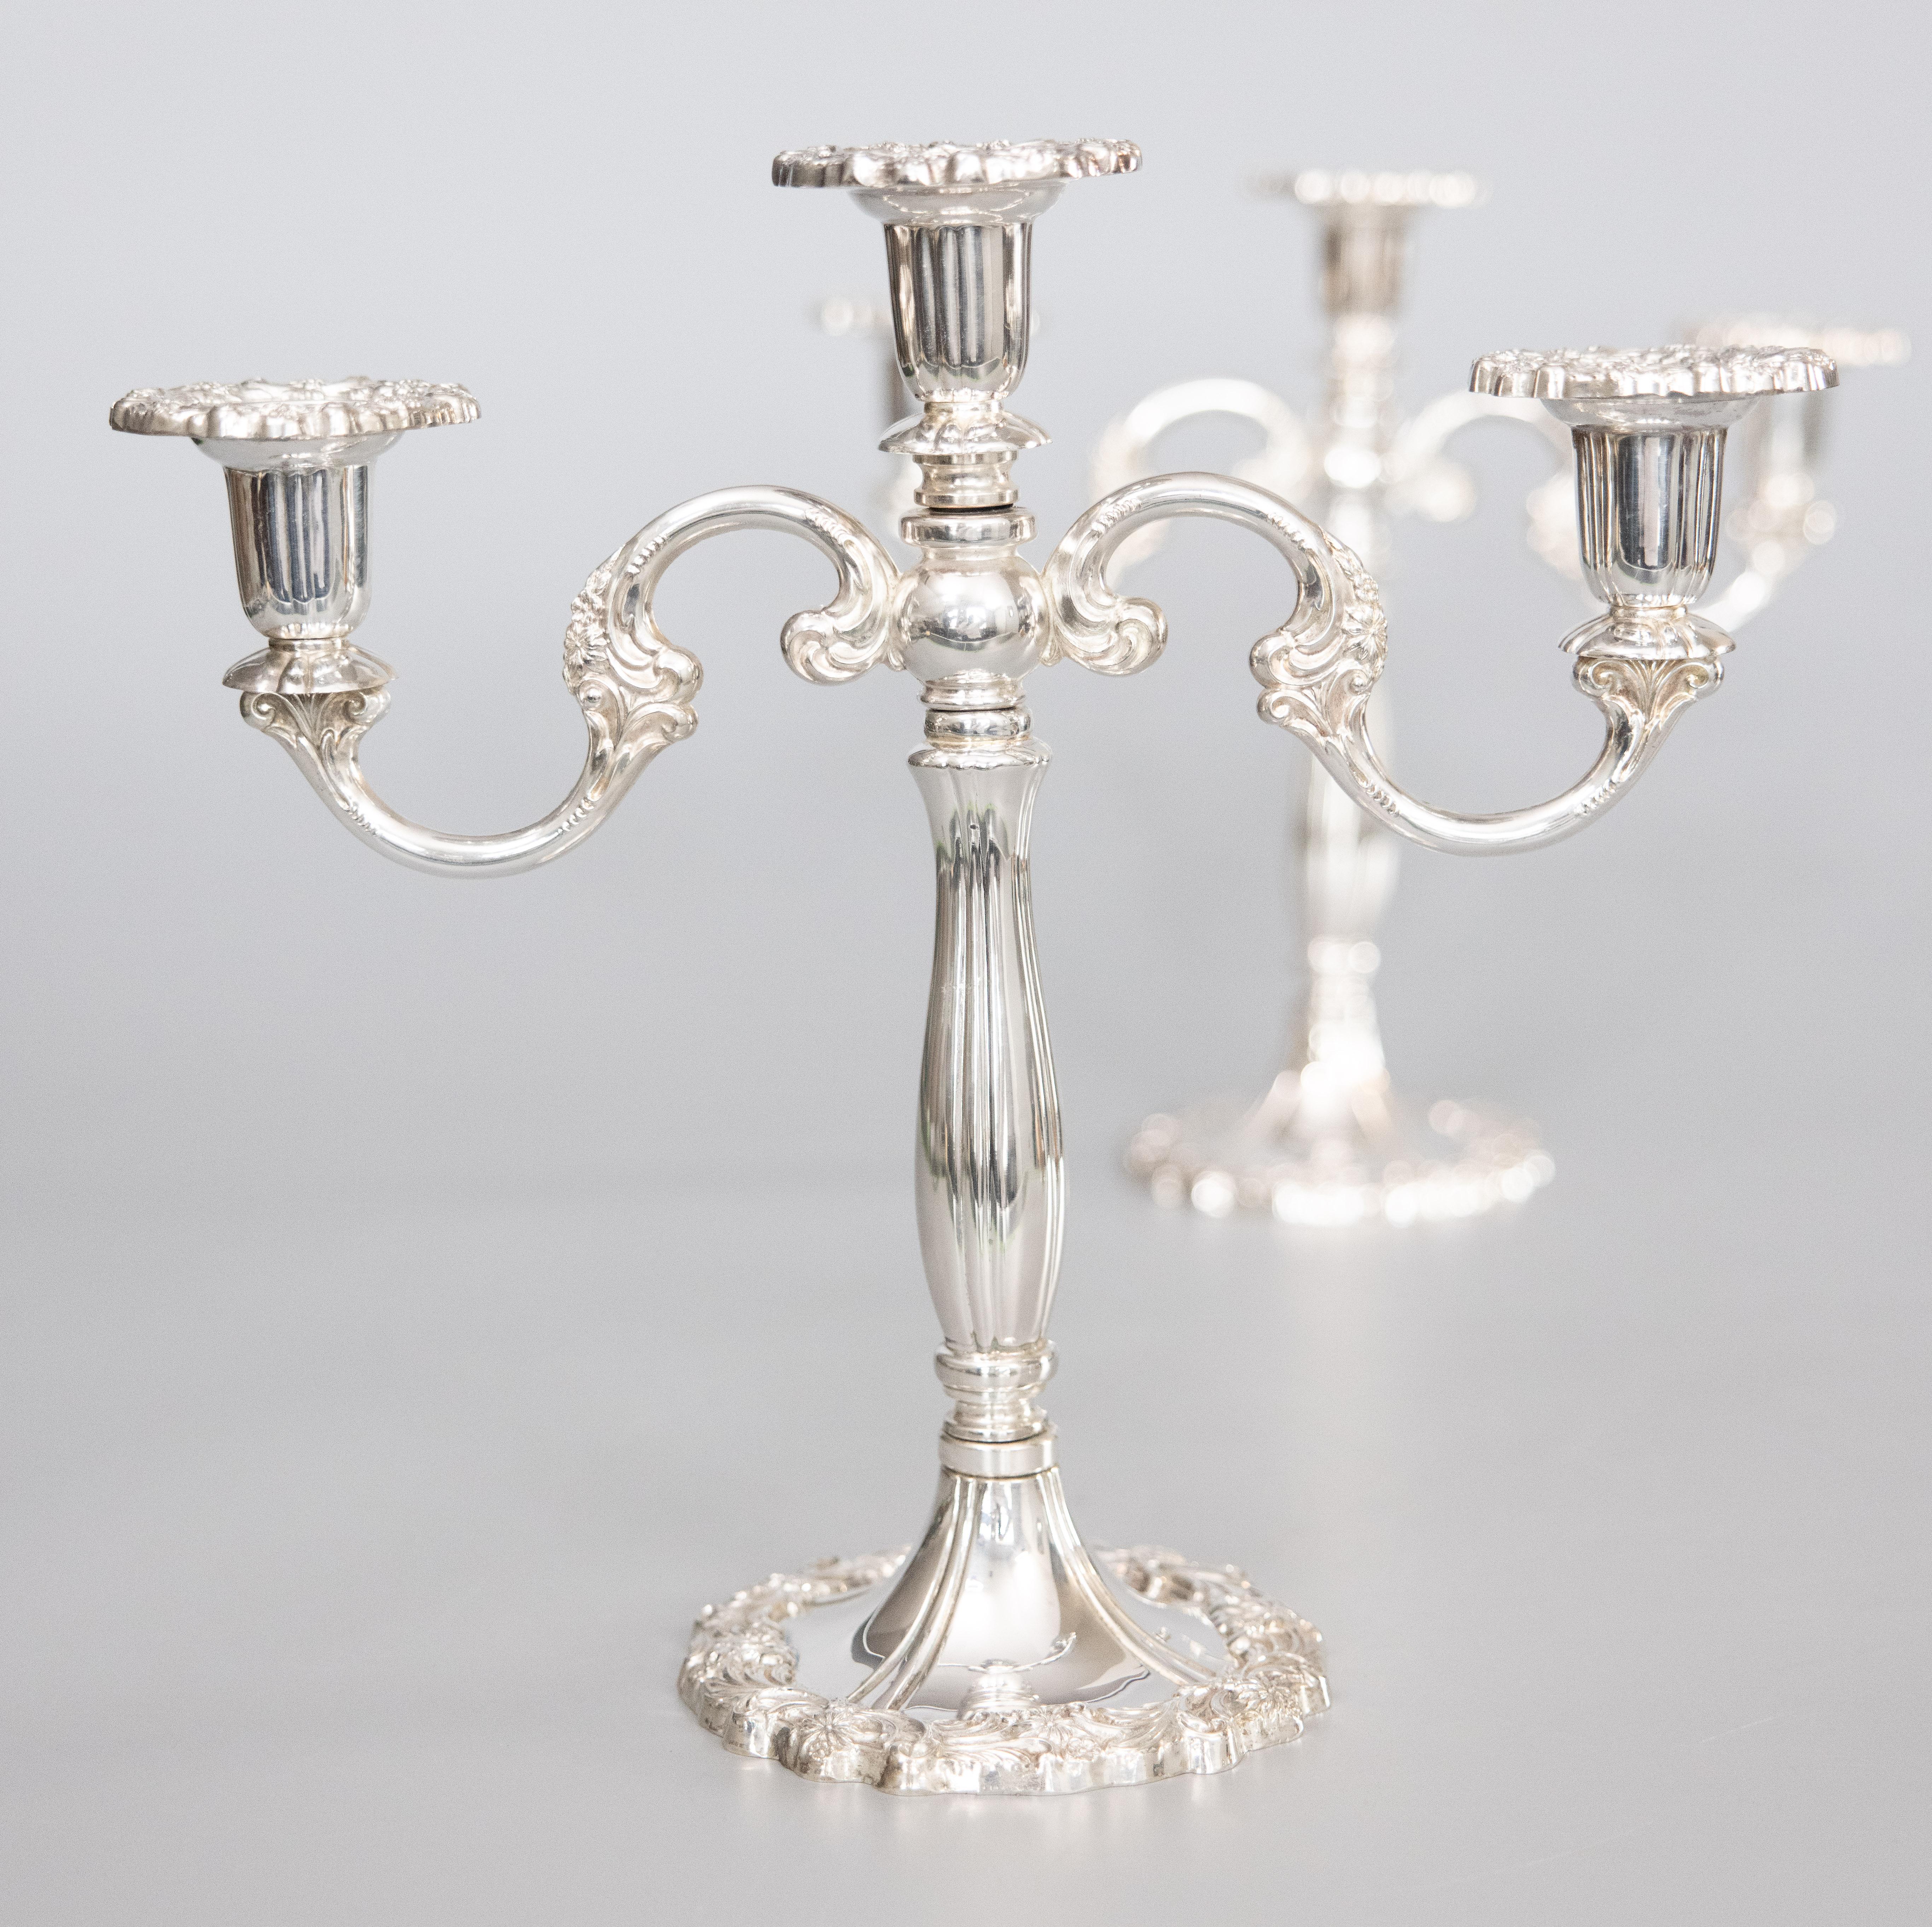 Pair of Mid 20th Century Italian Silver Plate Candelabras In Good Condition For Sale In Pearland, TX